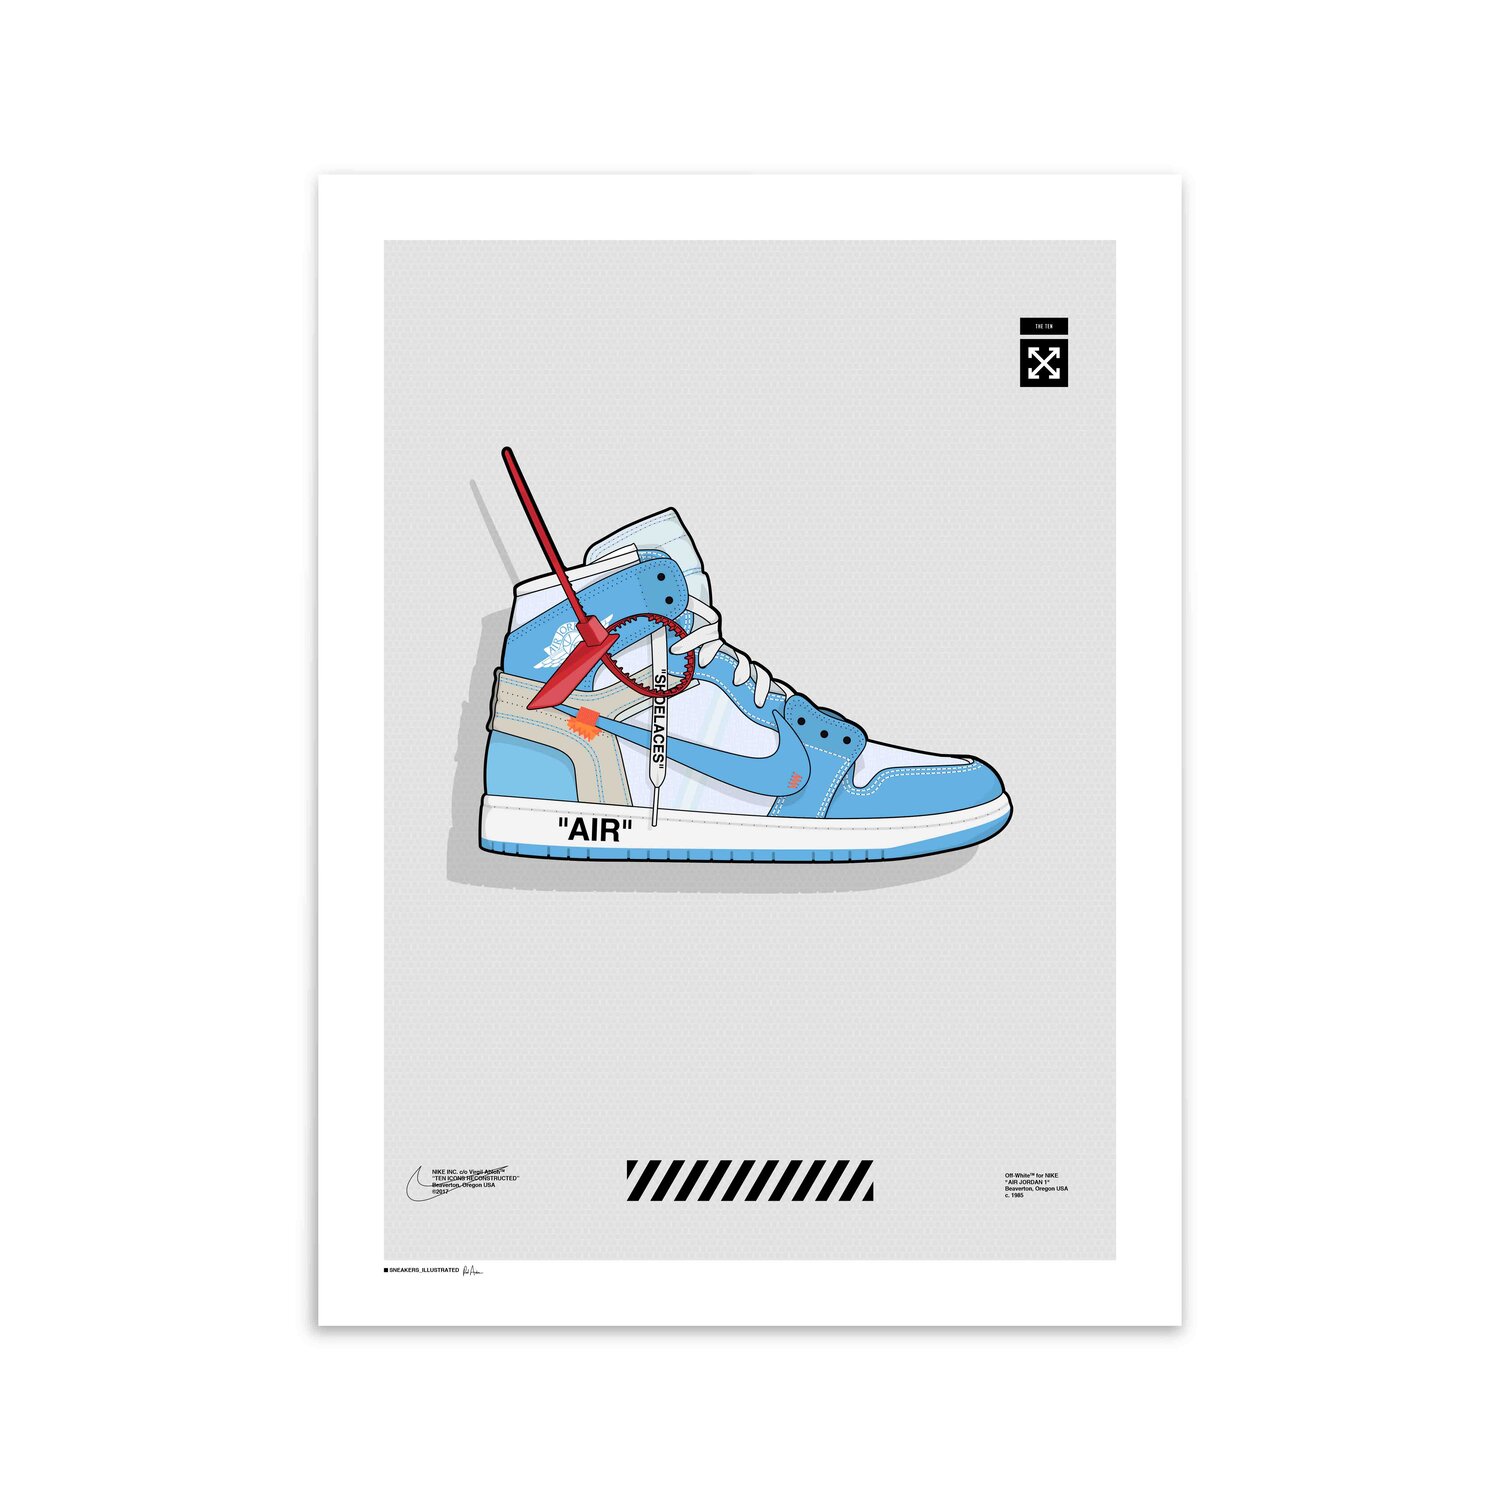 Ladrillo peso Superficial Off-White X Nike Air Jordan 1 'UNC' Poster — Sneakers Illustrated